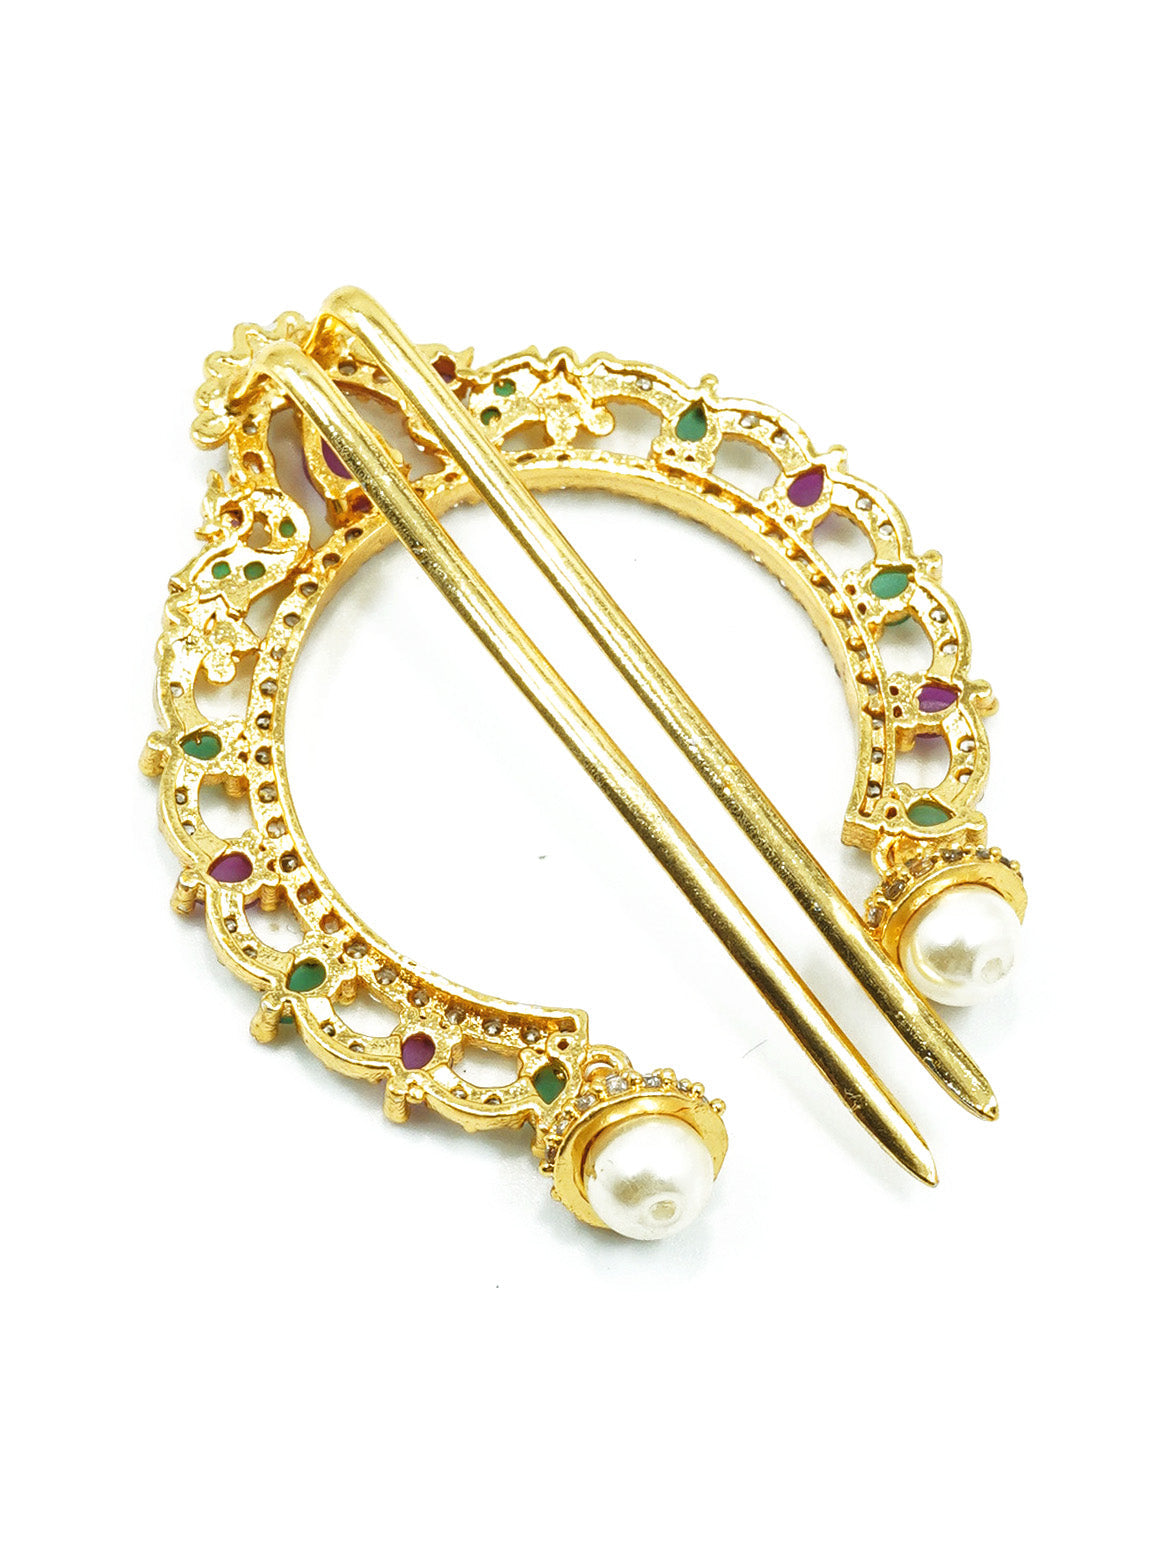 22k 1gm Gold Plated Emerald Stone Colour Studded Amboda / Hair Bow Pin 10679N